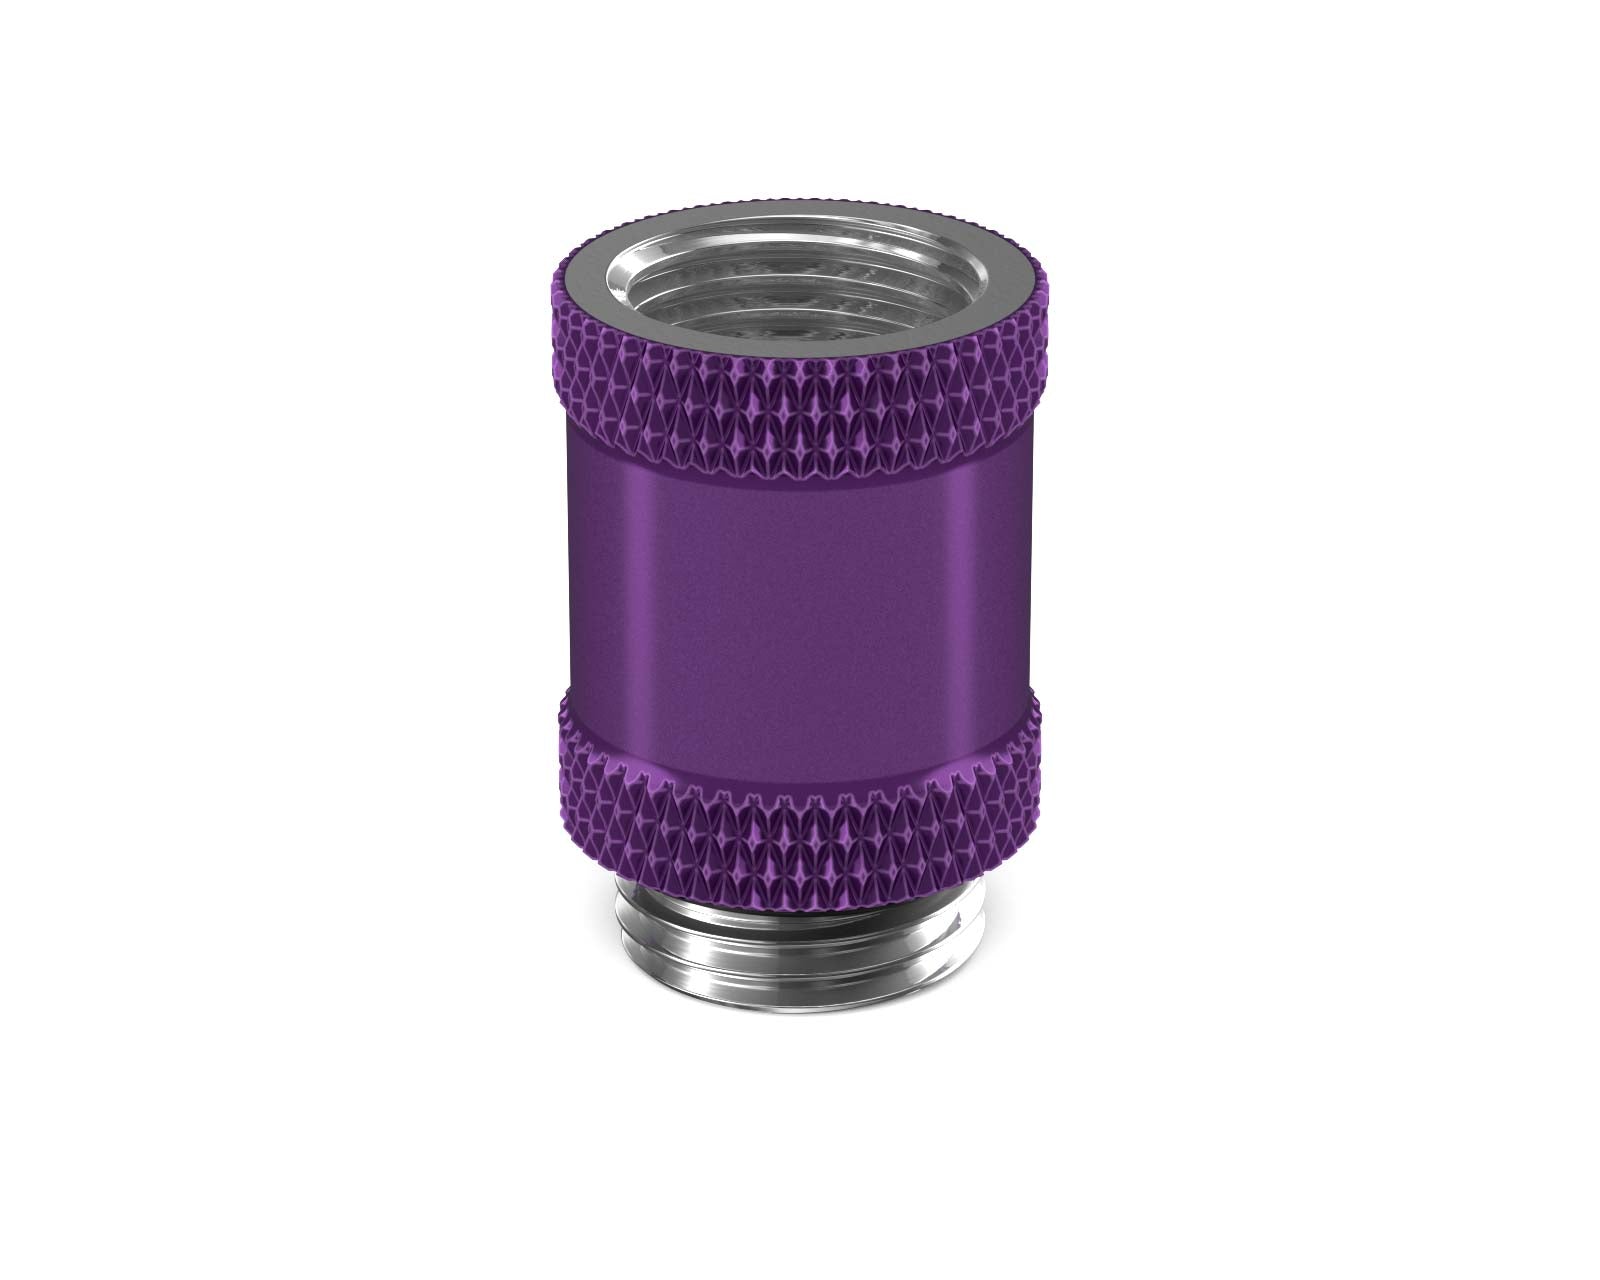 PrimoChill Male to Female G 1/4in. 20mm SX Extension Coupler - PrimoChill - KEEPING IT COOL Candy Purple